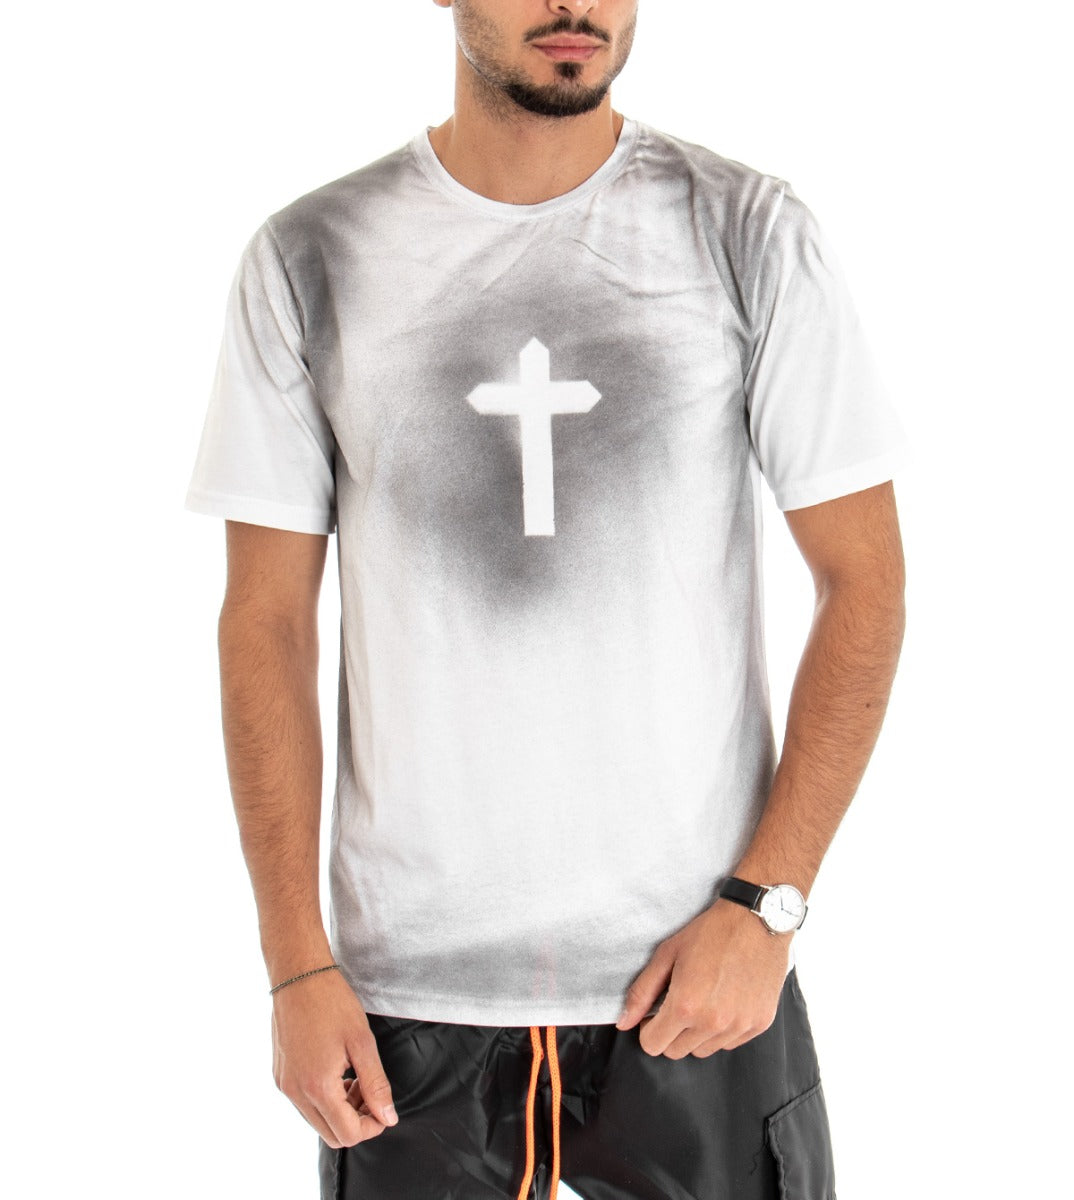 Men's T-shirt Short Sleeves Cotton Round Neck Casual Cross White GIOSAL